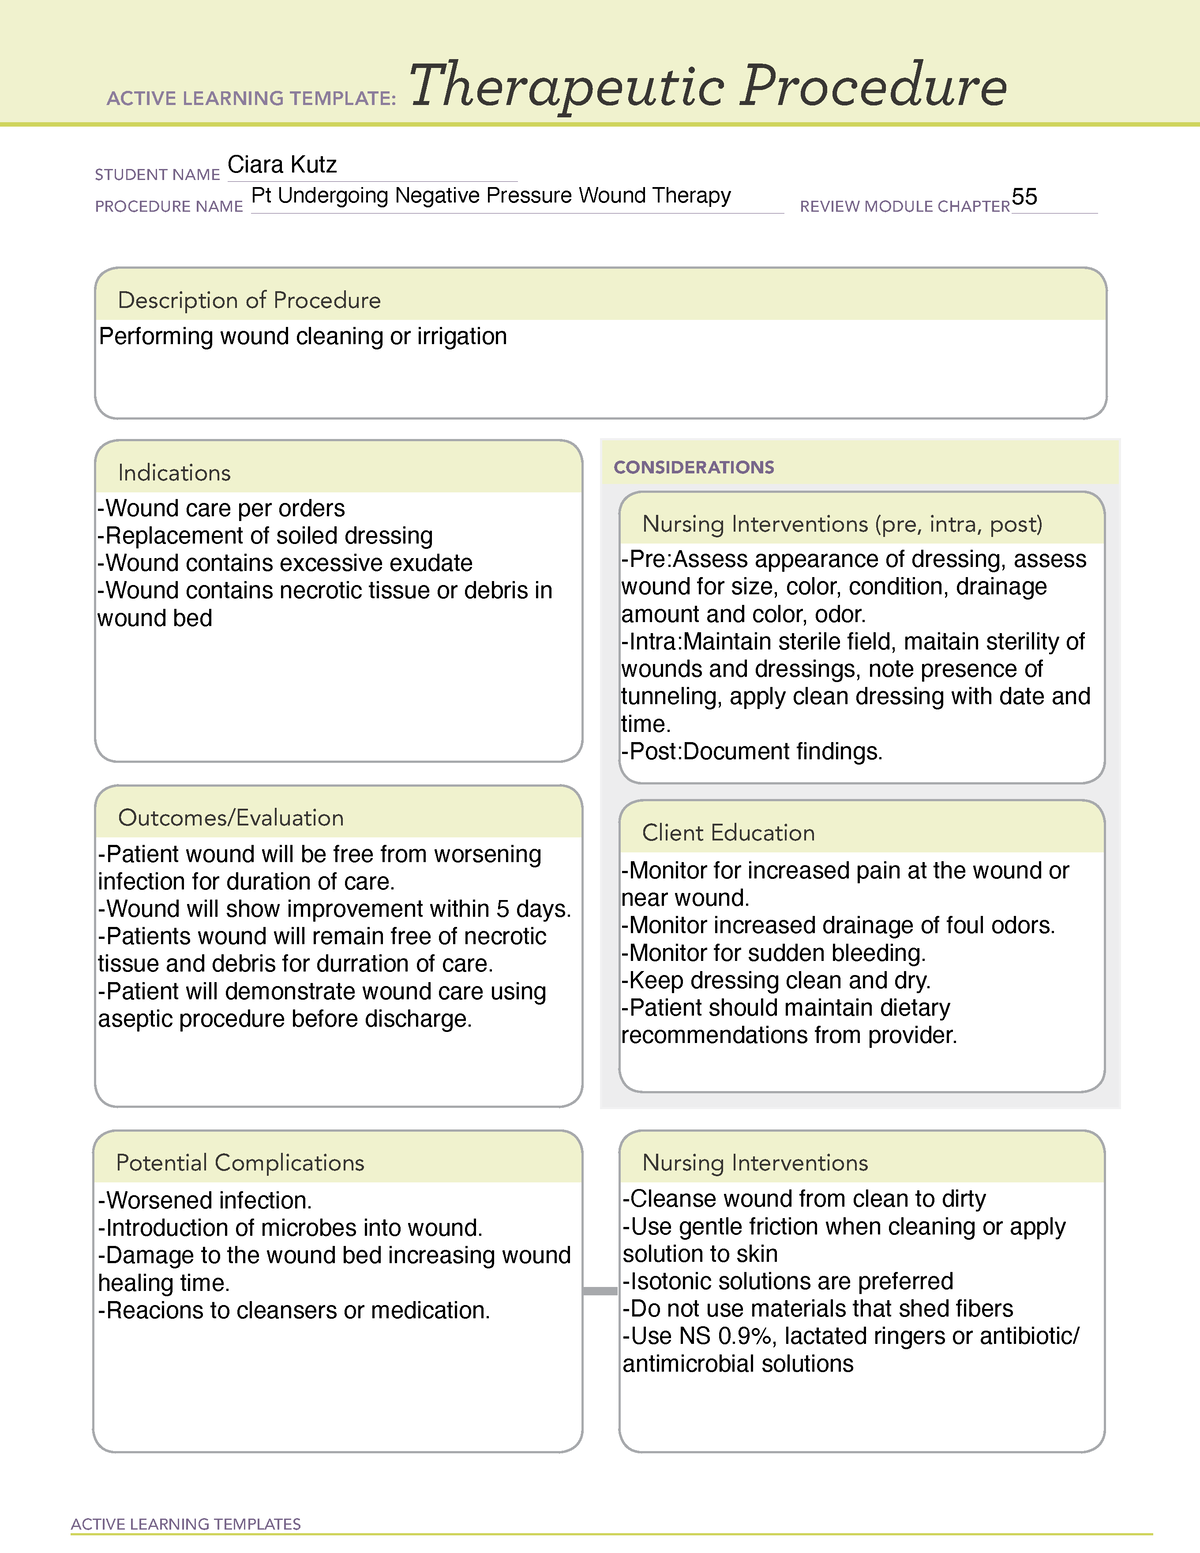 Negative Pressure Wound Therapy Nurs 340 Active Learning Templates